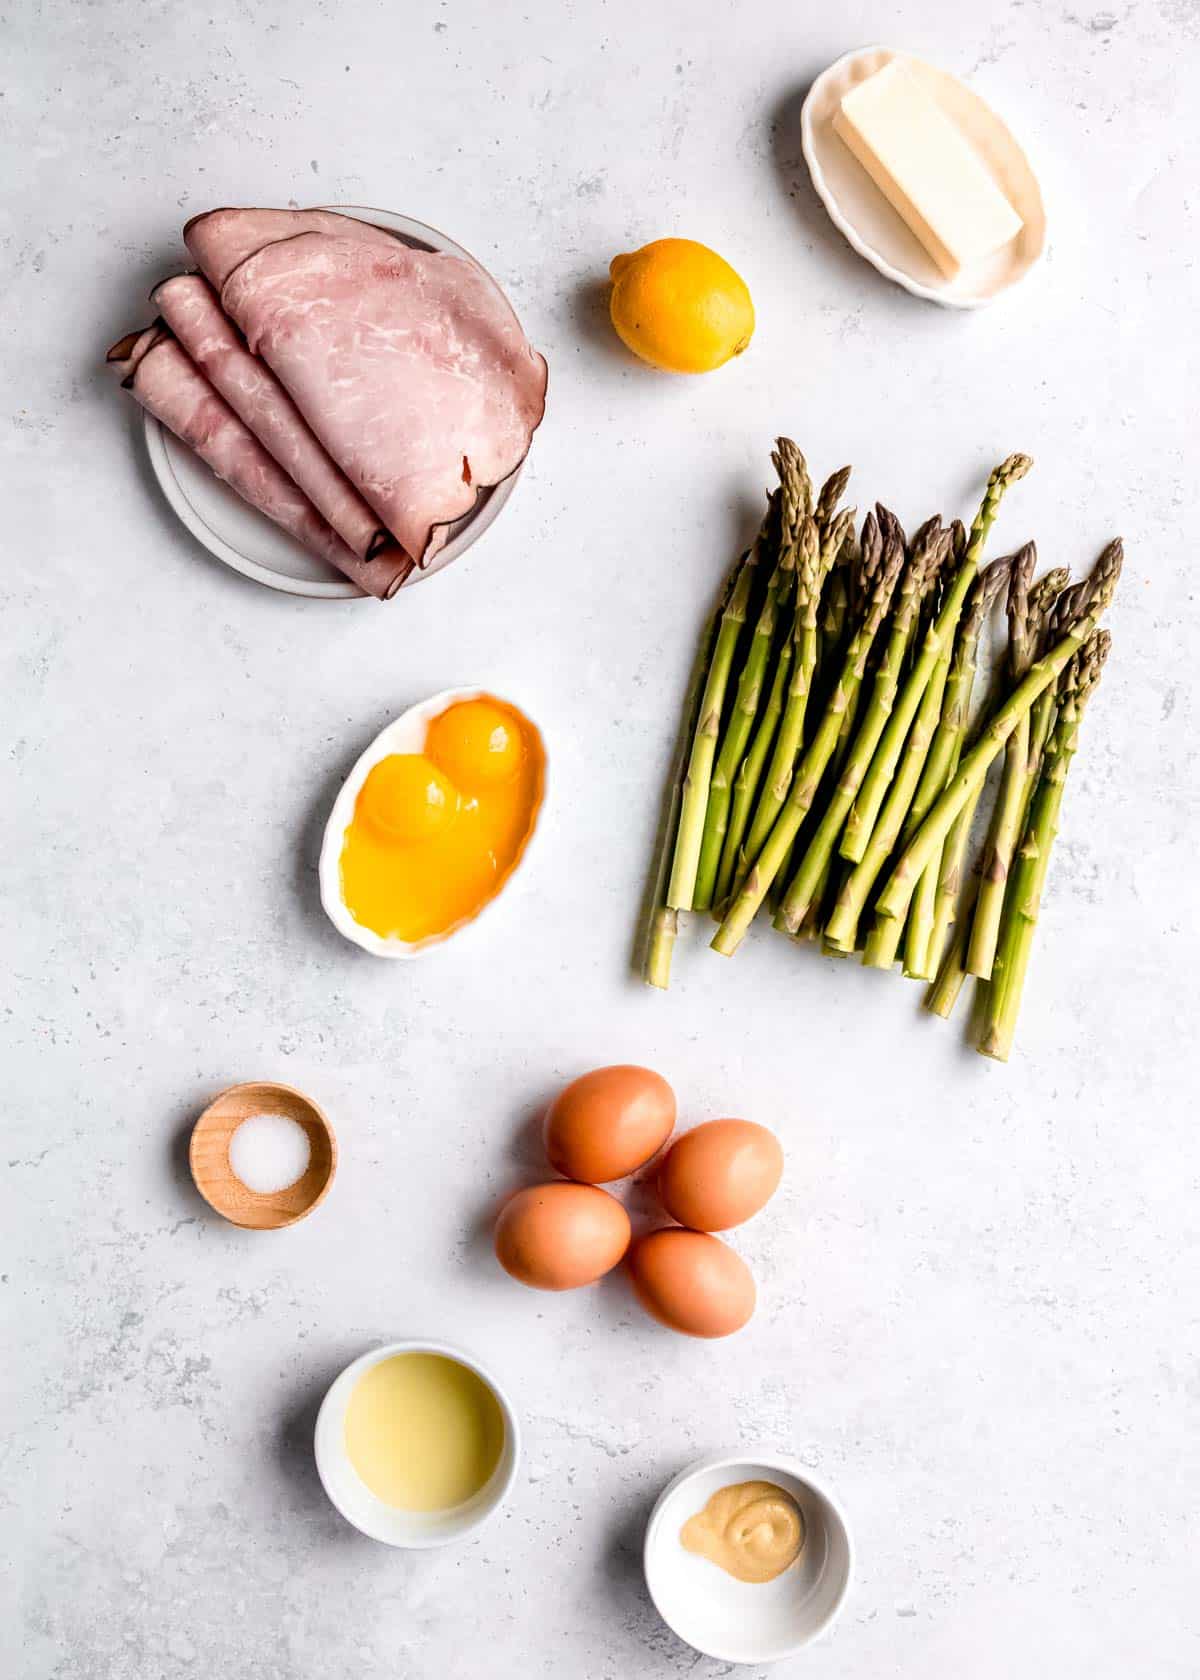 asparagus eggs benedict ingredients on a white table